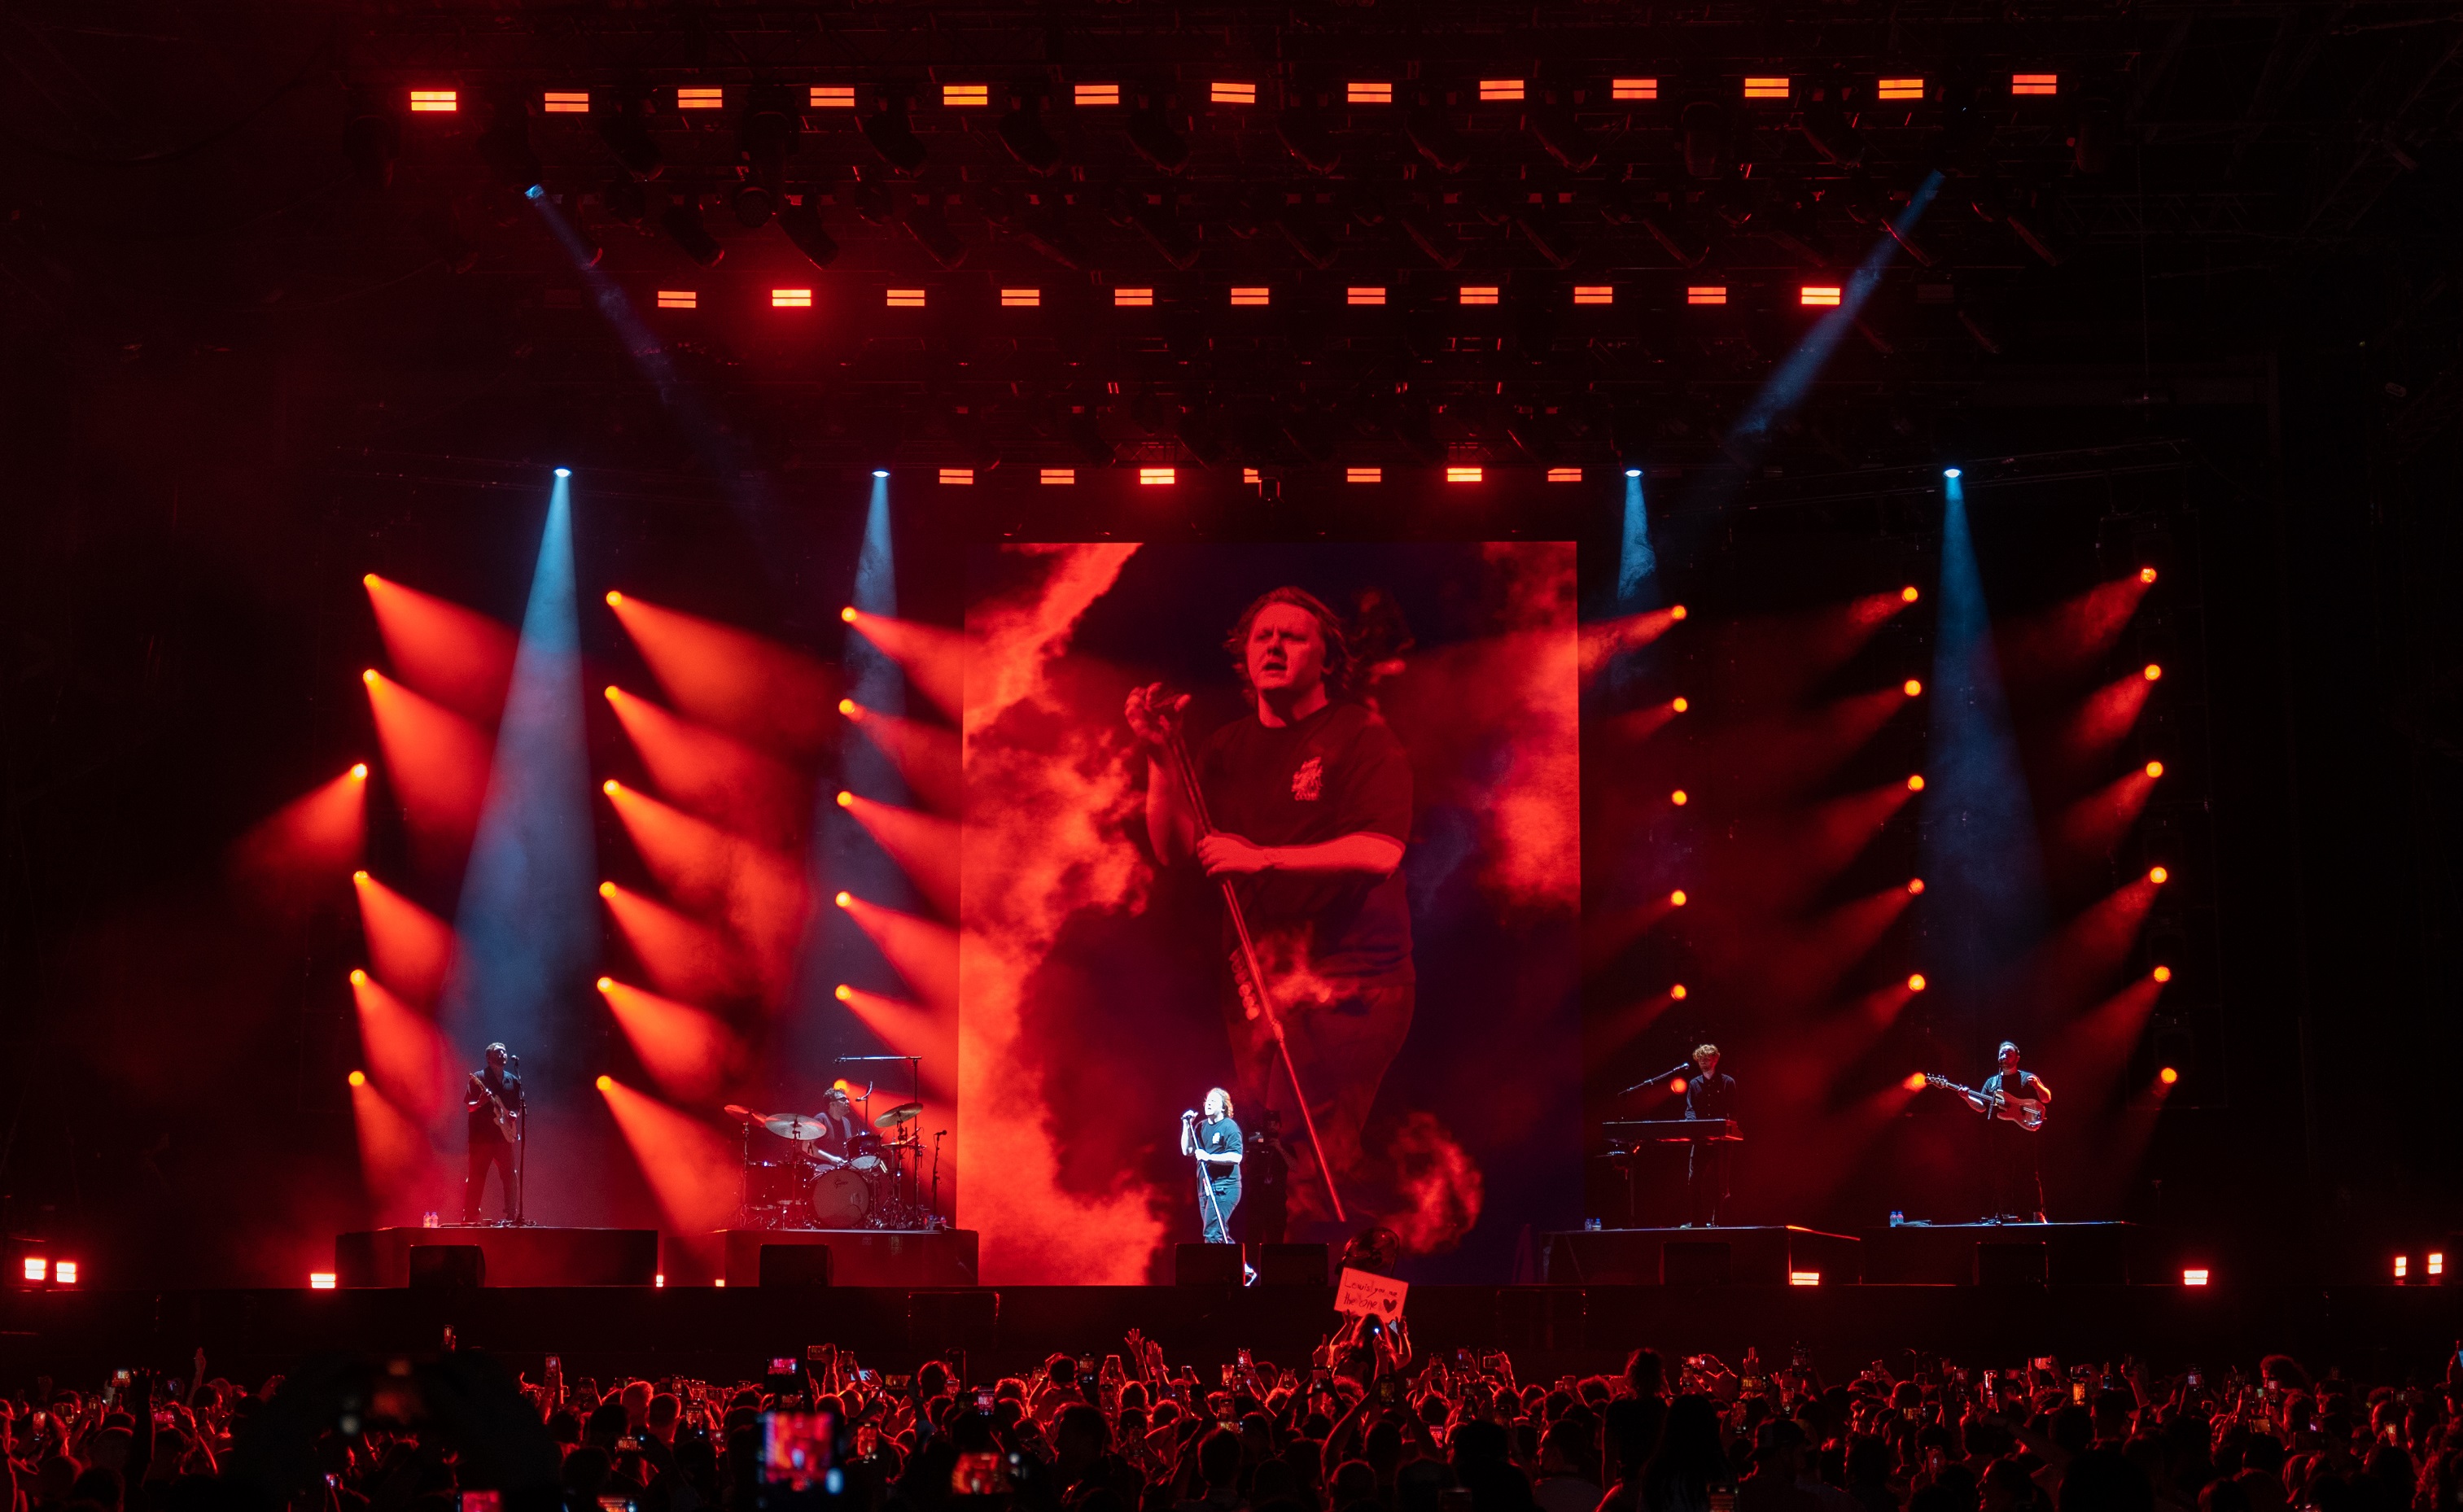 ABU DHABI HAS A NEW SOMEONE TO LOVE AS LEWIS CAPALDI LIGHTS UP YASALAM AFTER-RACE CONCERTS